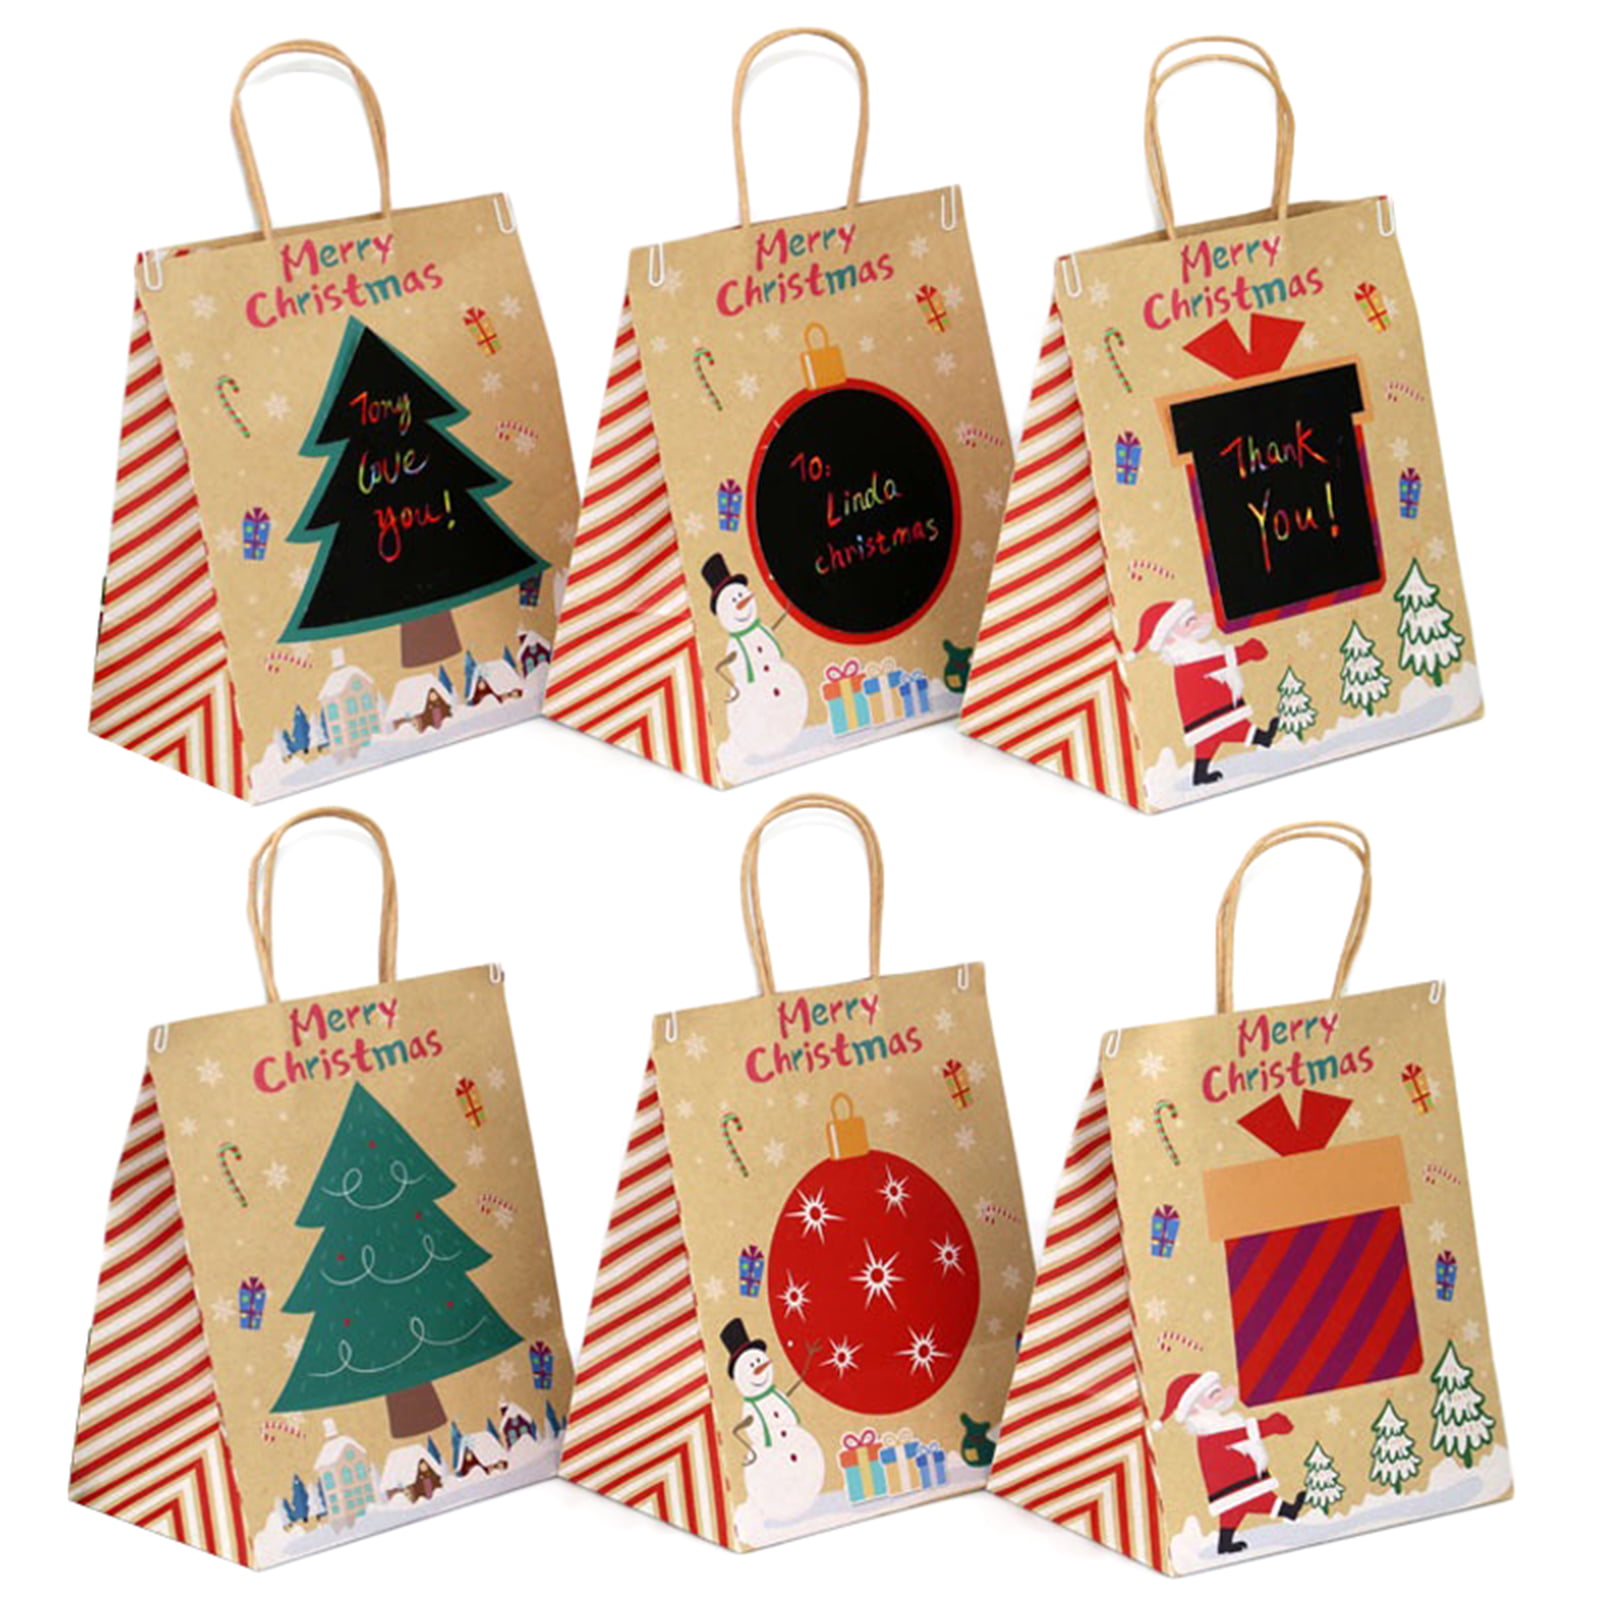 Merry Christmas Kraft Paper Bag Santa Claus Gift Bags Candy Bag Party Supplies 